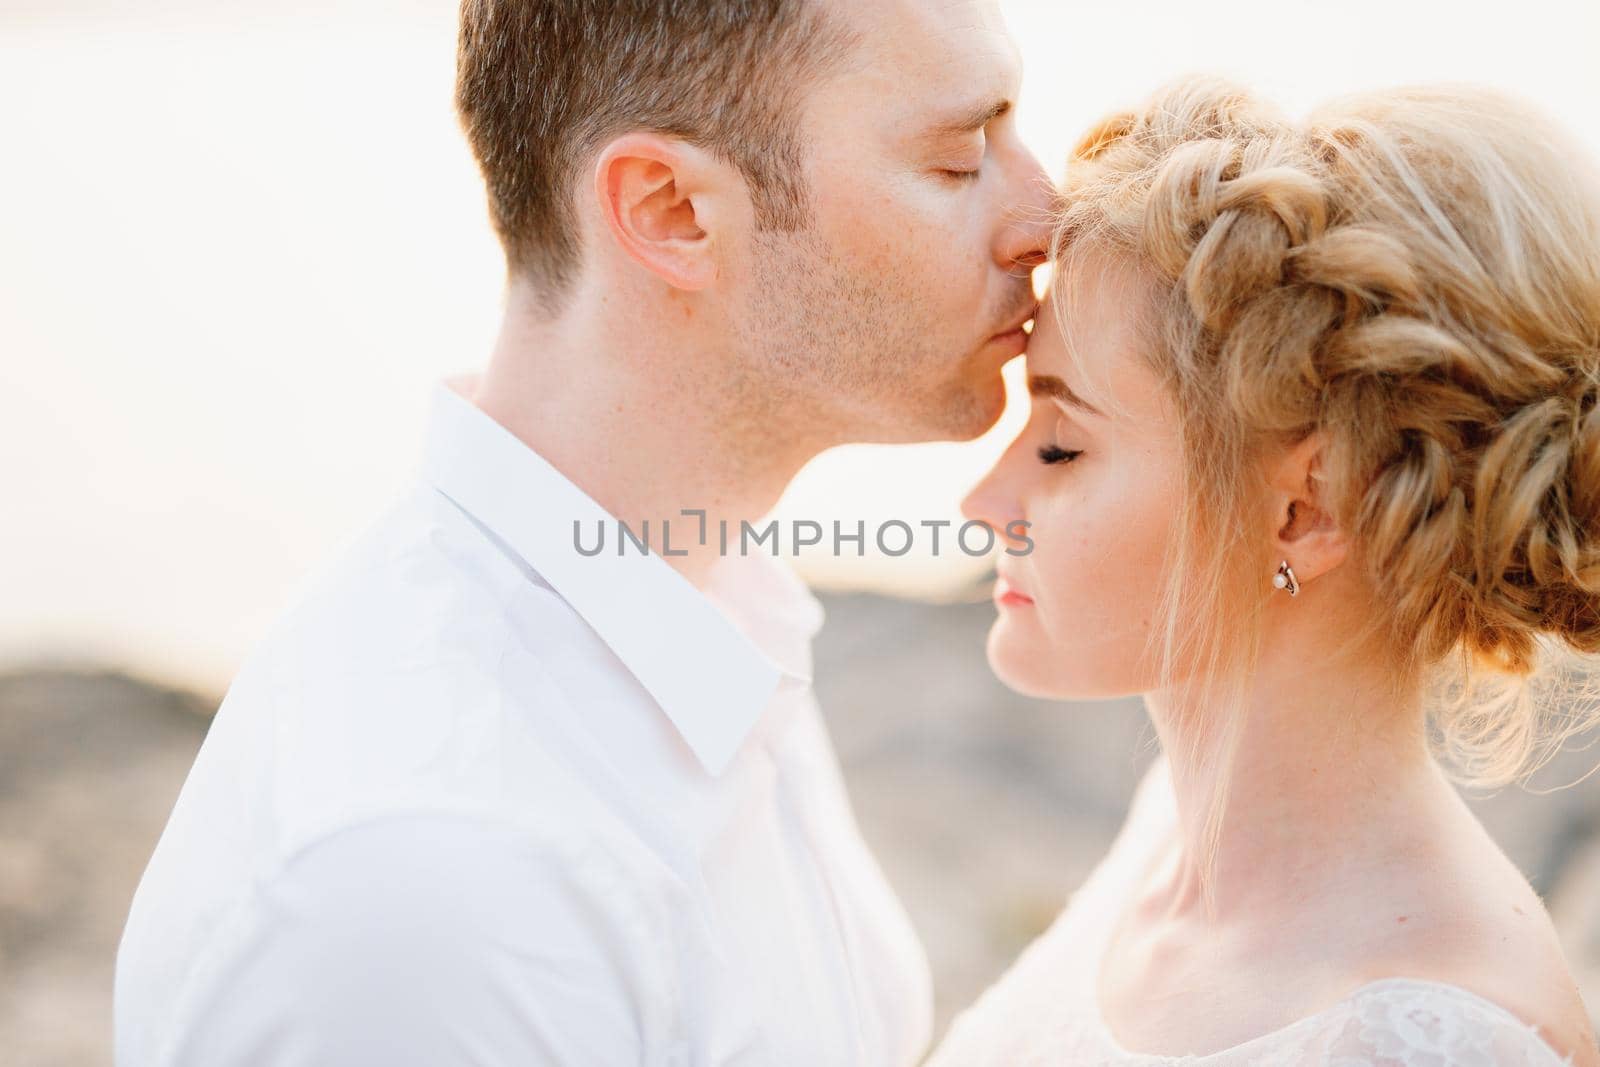 The groom gently kisses the bride on the forehead on the rocks by the sea, close-up by Nadtochiy